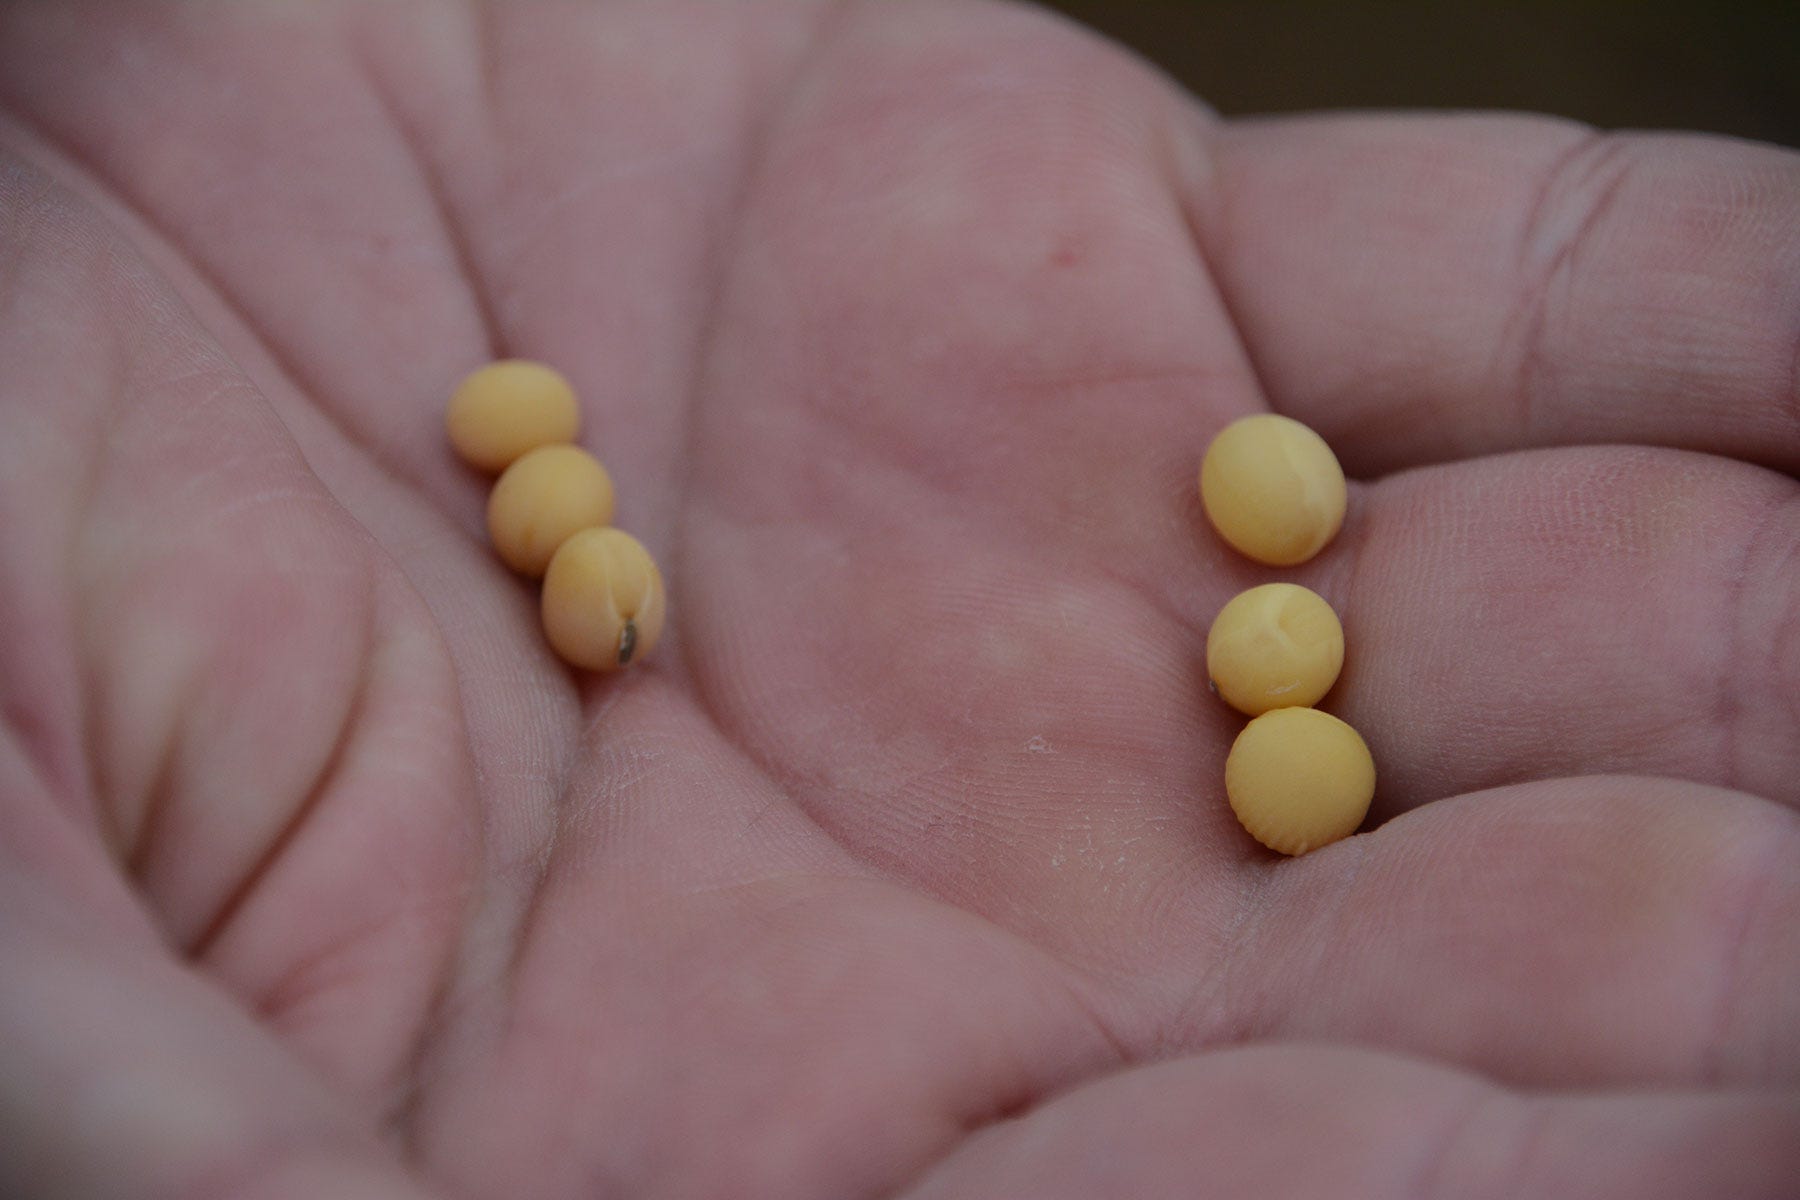  six soybean seeds in the palm of a hand